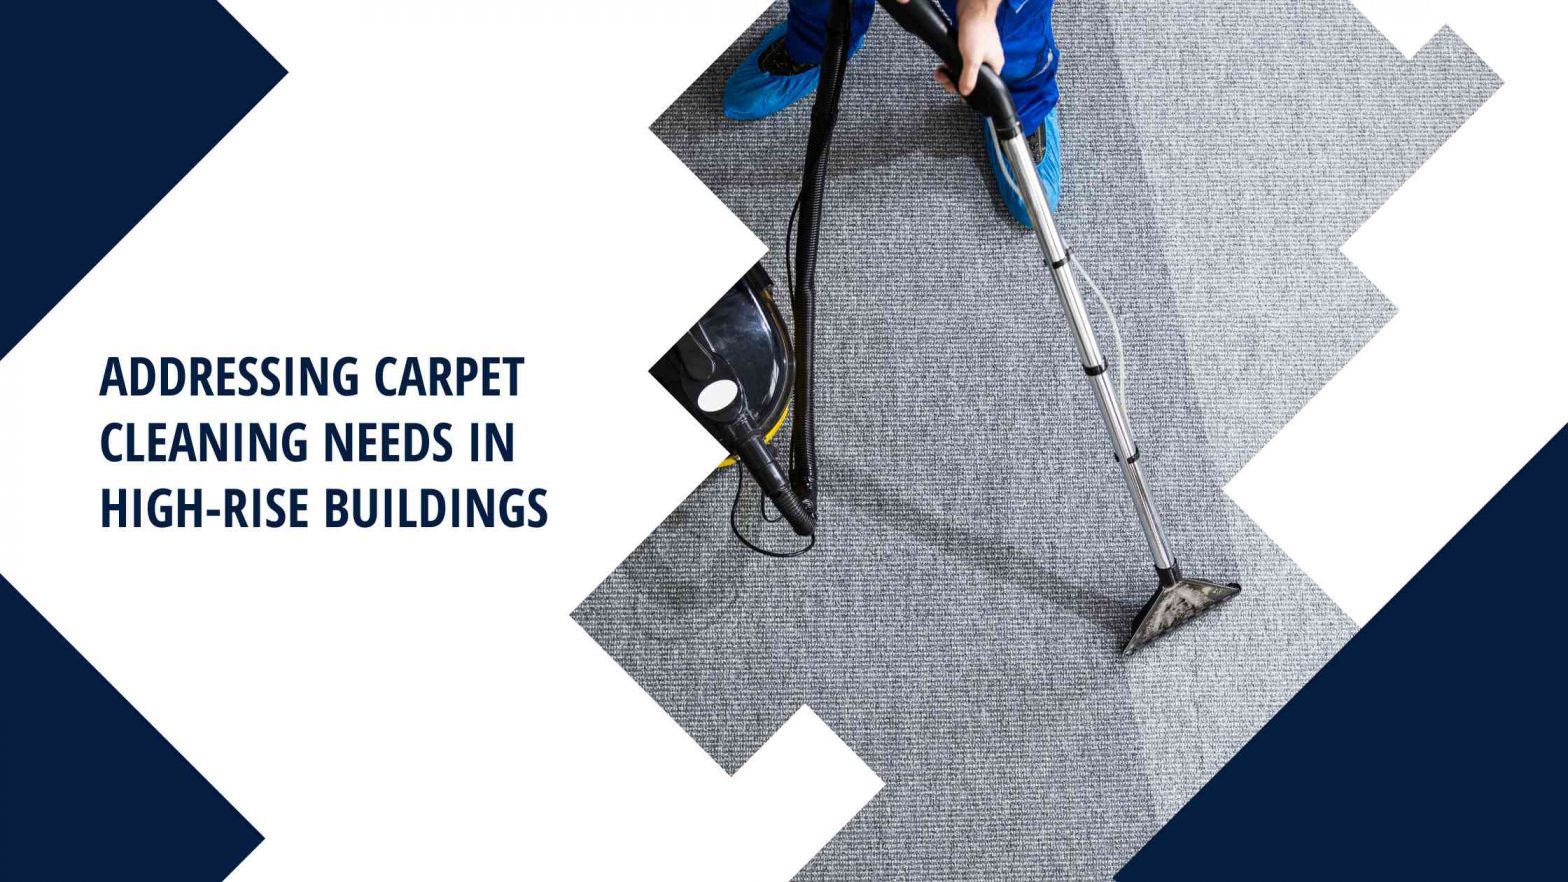 Carpet Cleaning for High-rise Buildings